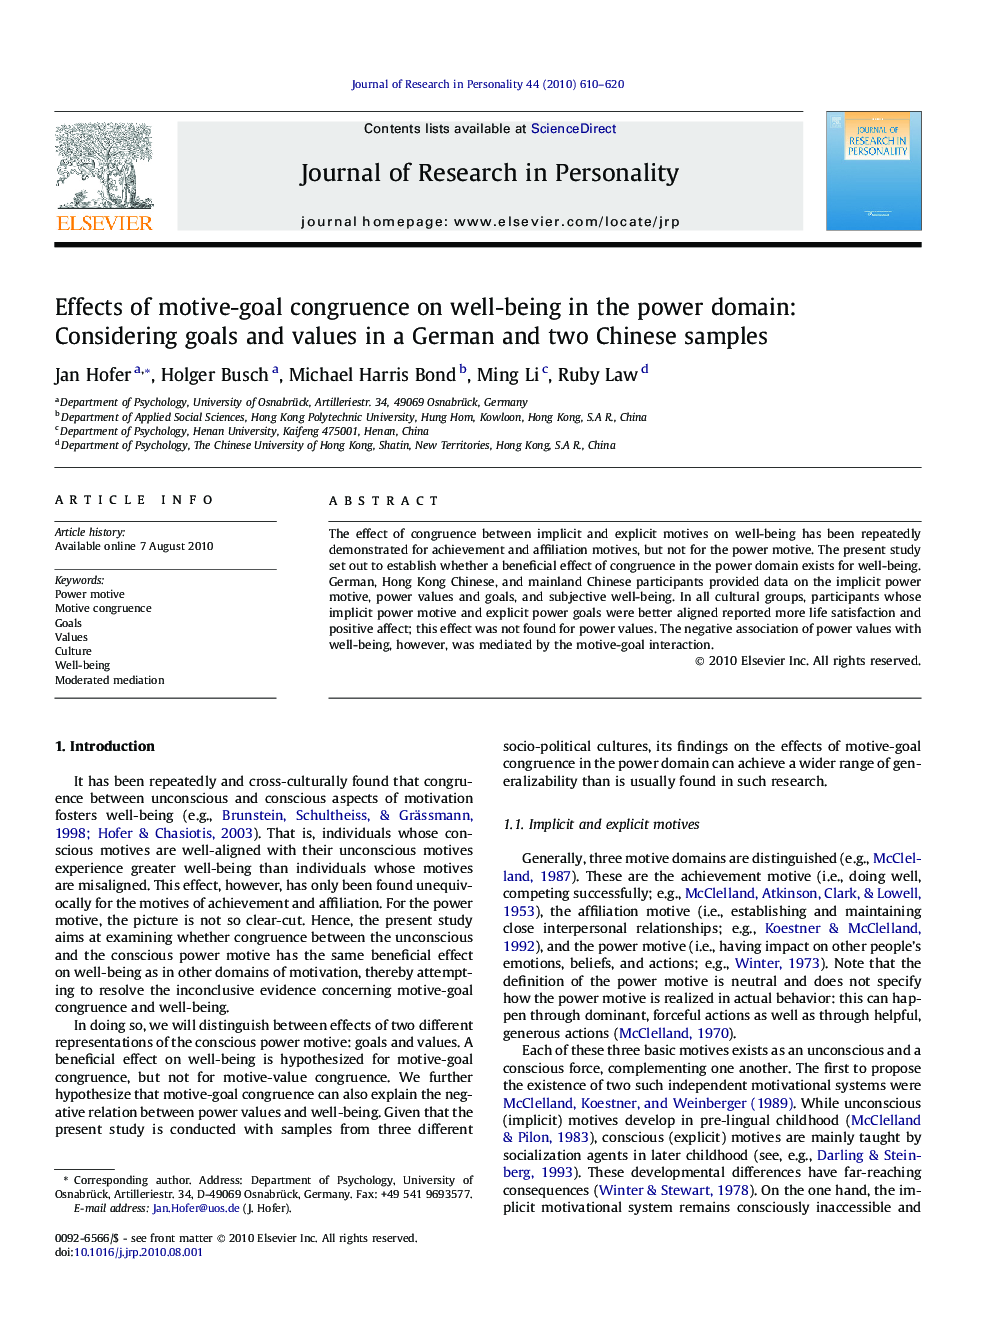 Effects of motive-goal congruence on well-being in the power domain: Considering goals and values in a German and two Chinese samples